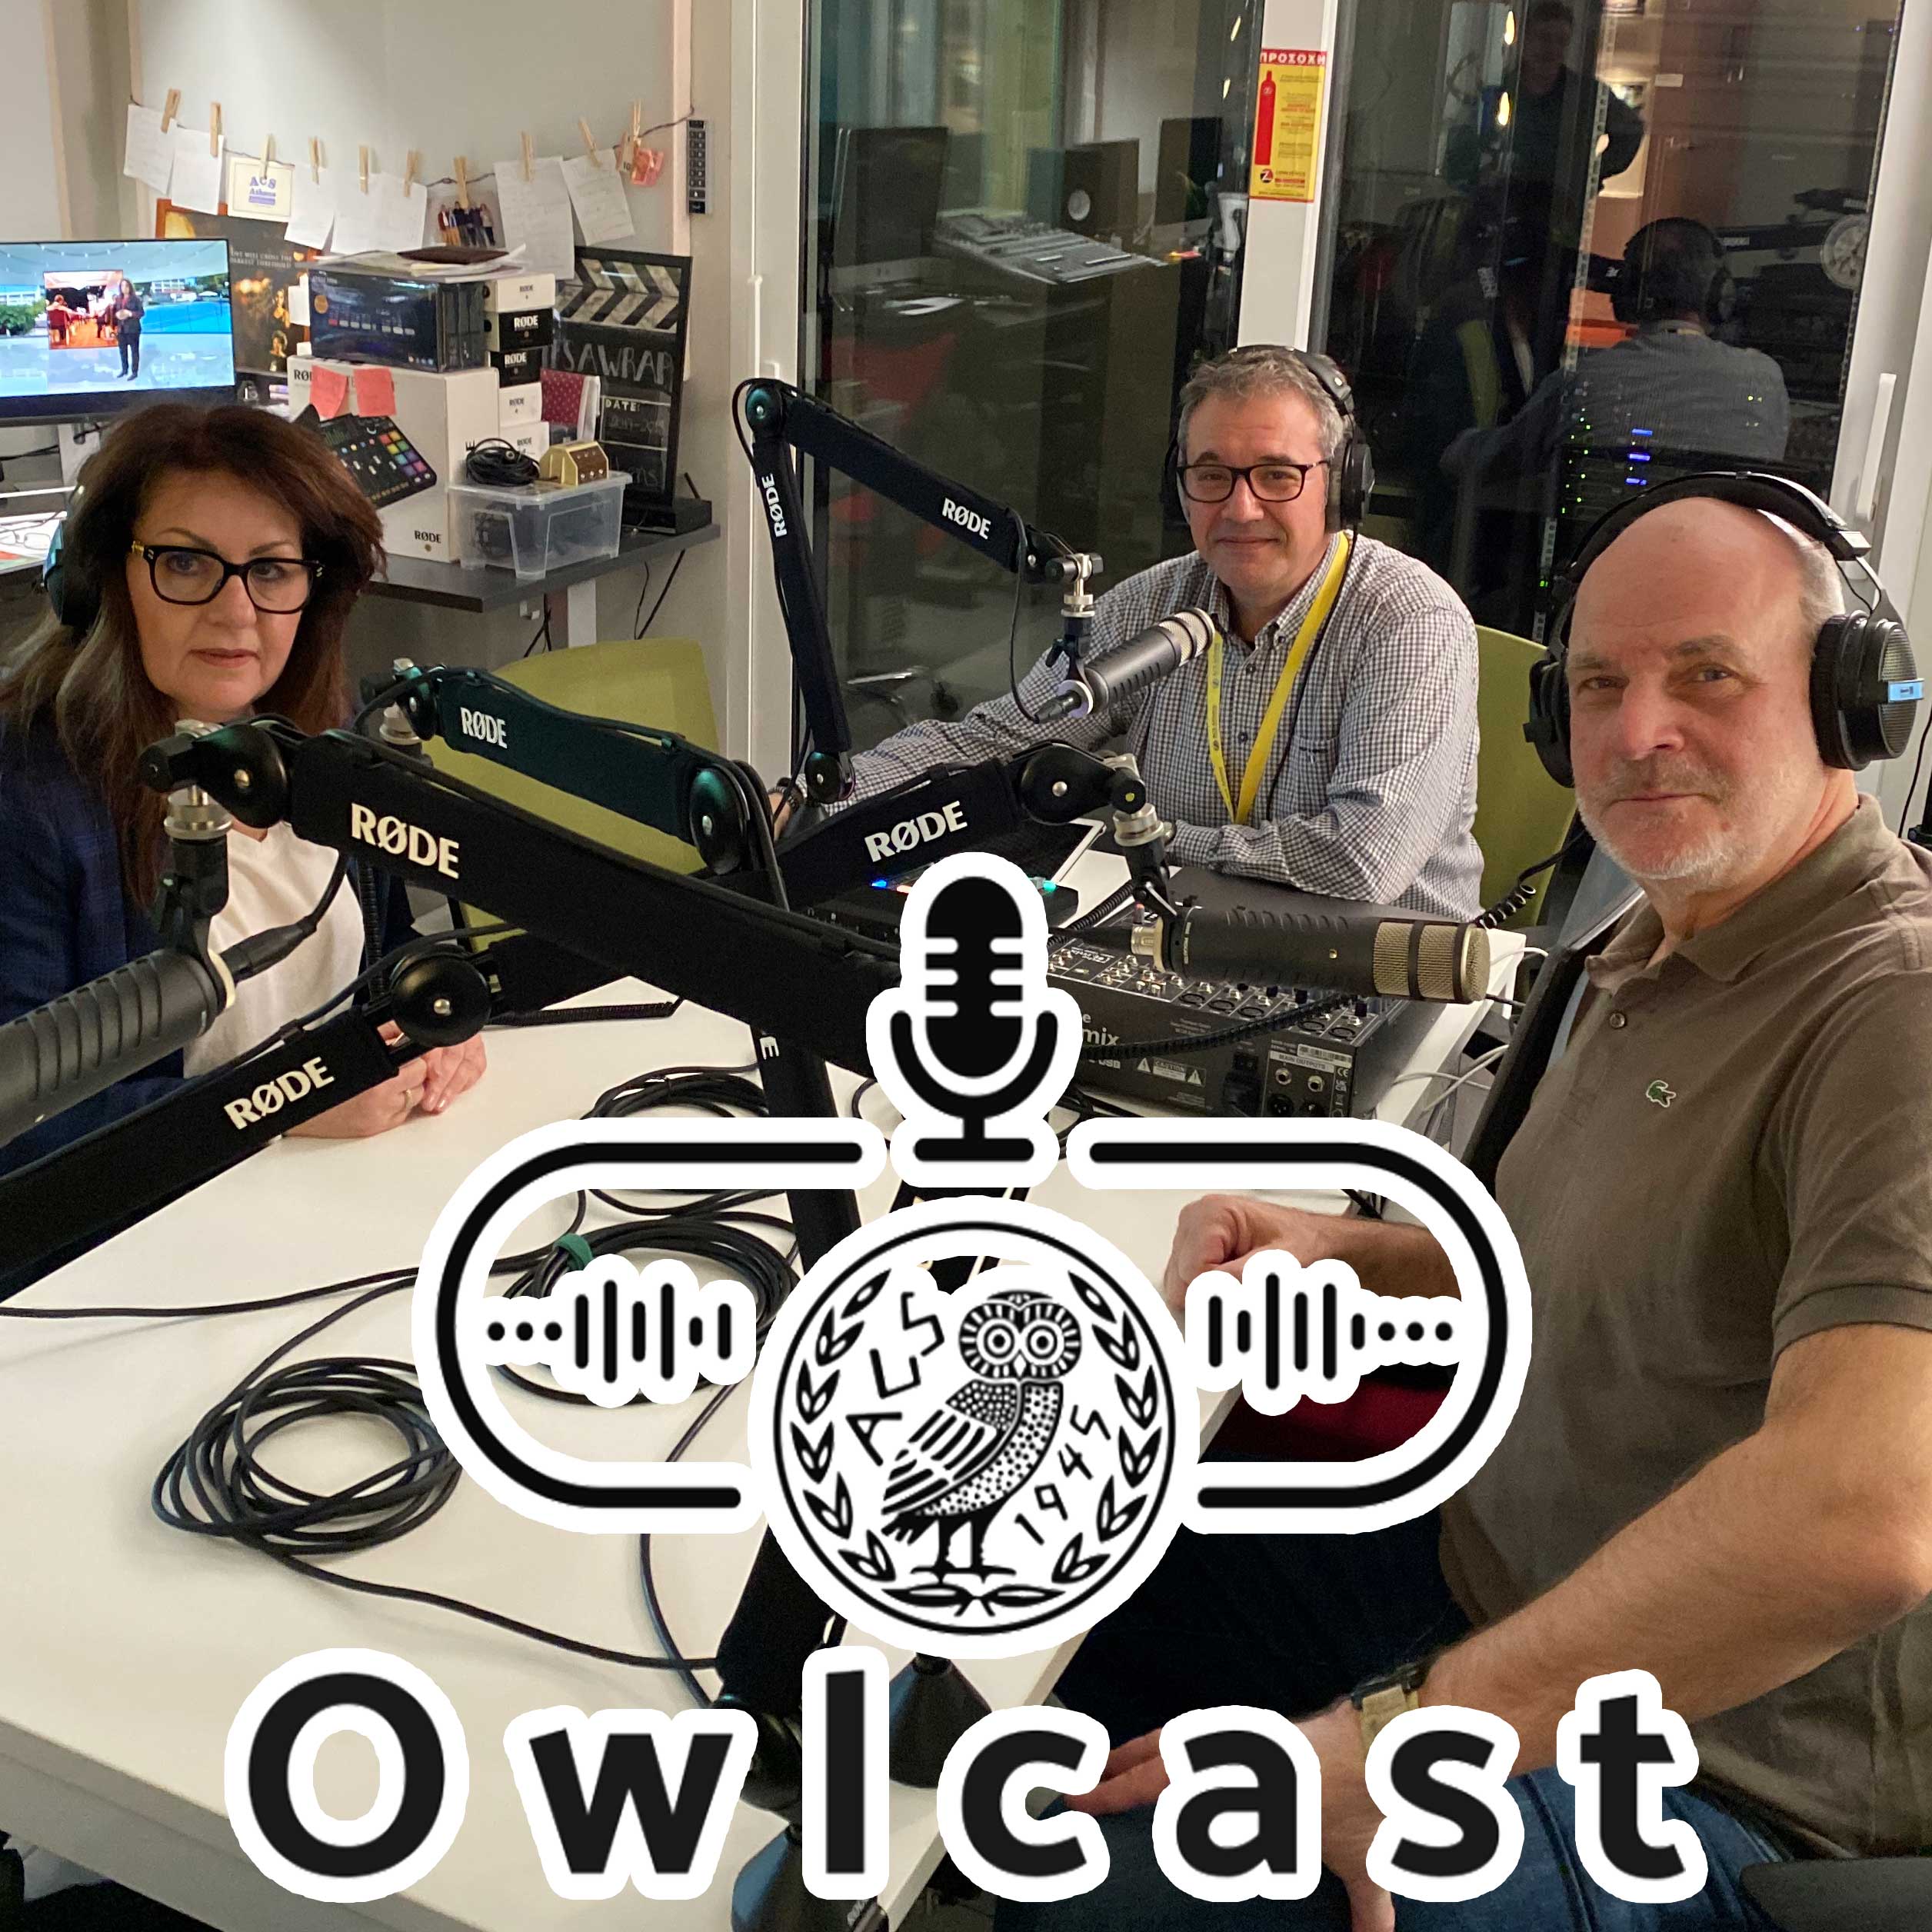 Owlcast 52 - with Dr. Zillmer and Dr. Pelonis